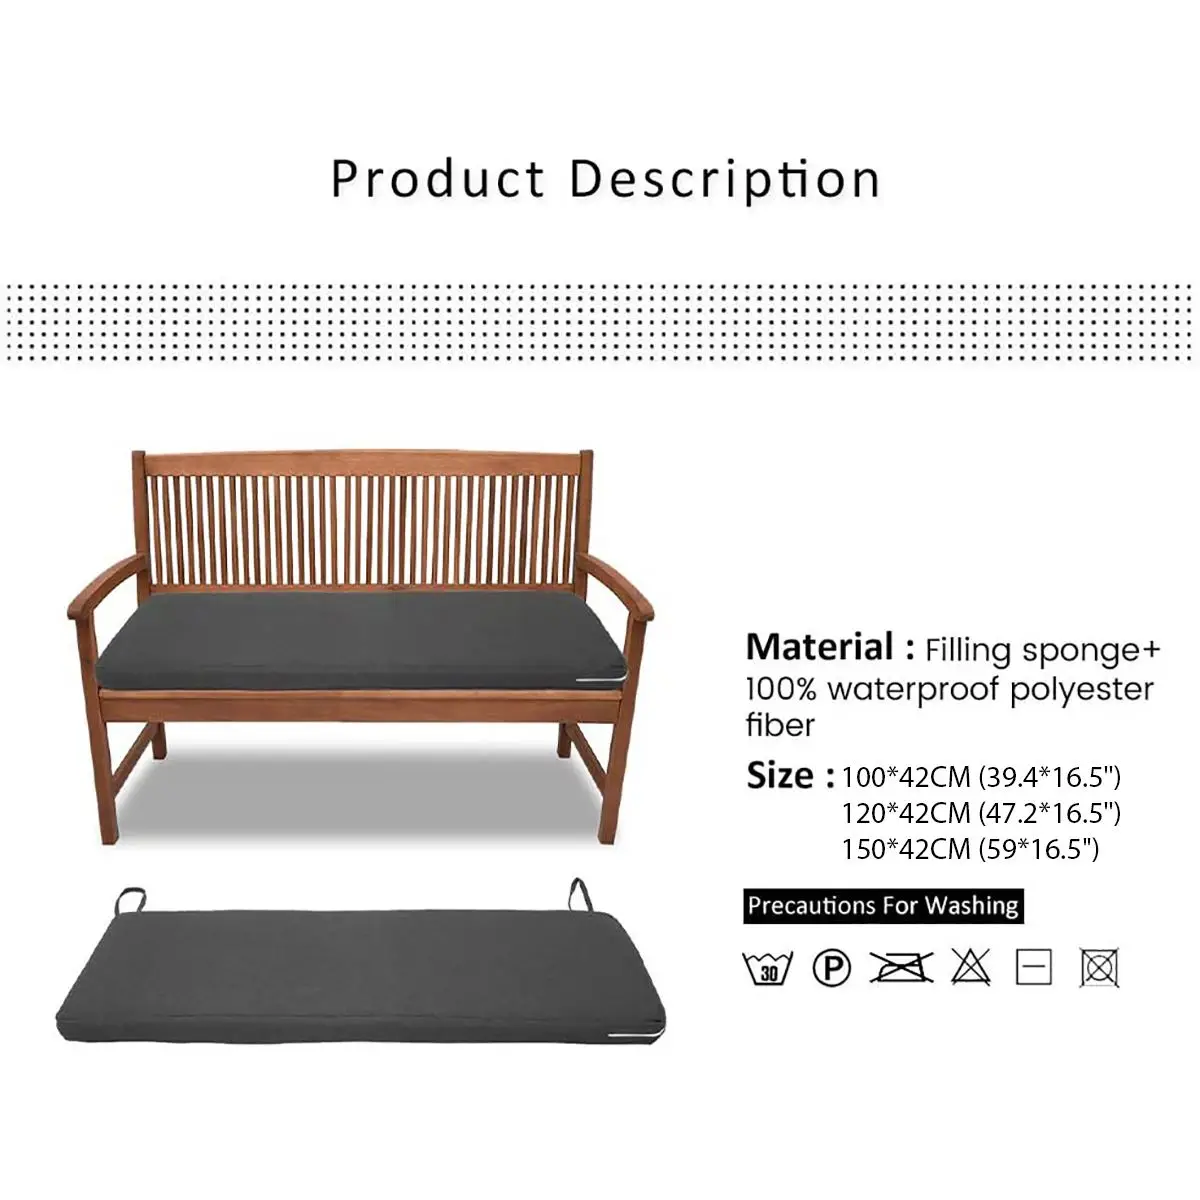 100/120/150cm Outdoor Solid Color Bench Cushion Waterproof Seat Pad with Bandage Garden Patio Furniture Chair Cushion No Chair images - 6